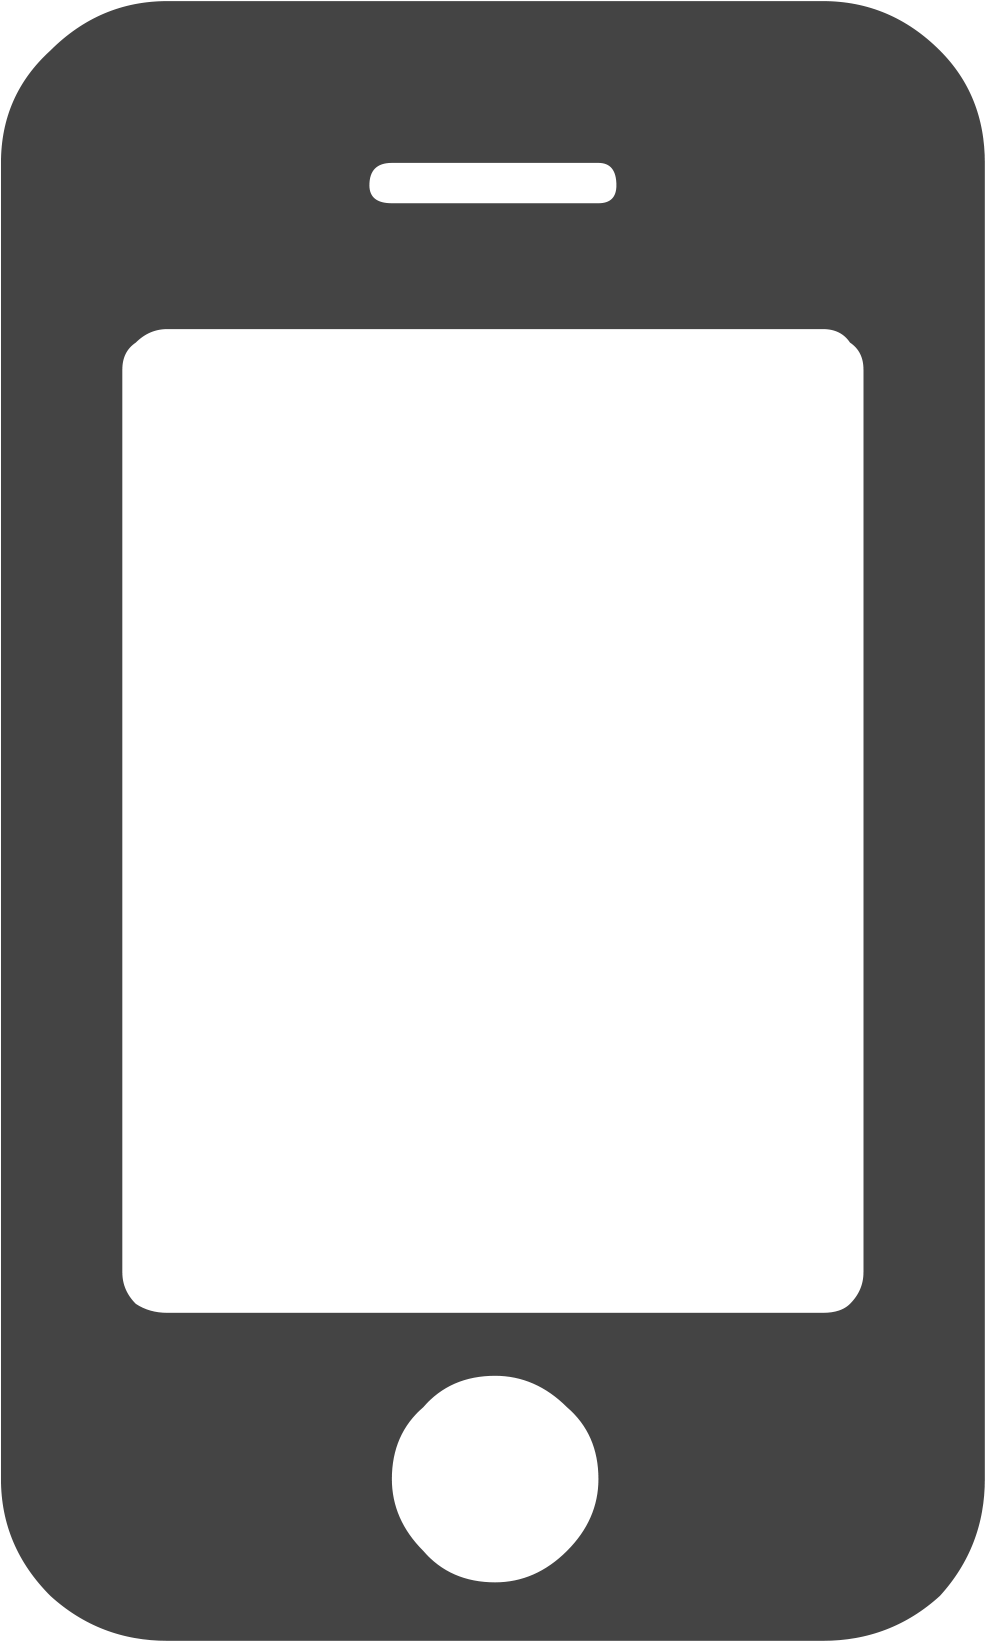 Smartphone Icon Graphic PNG